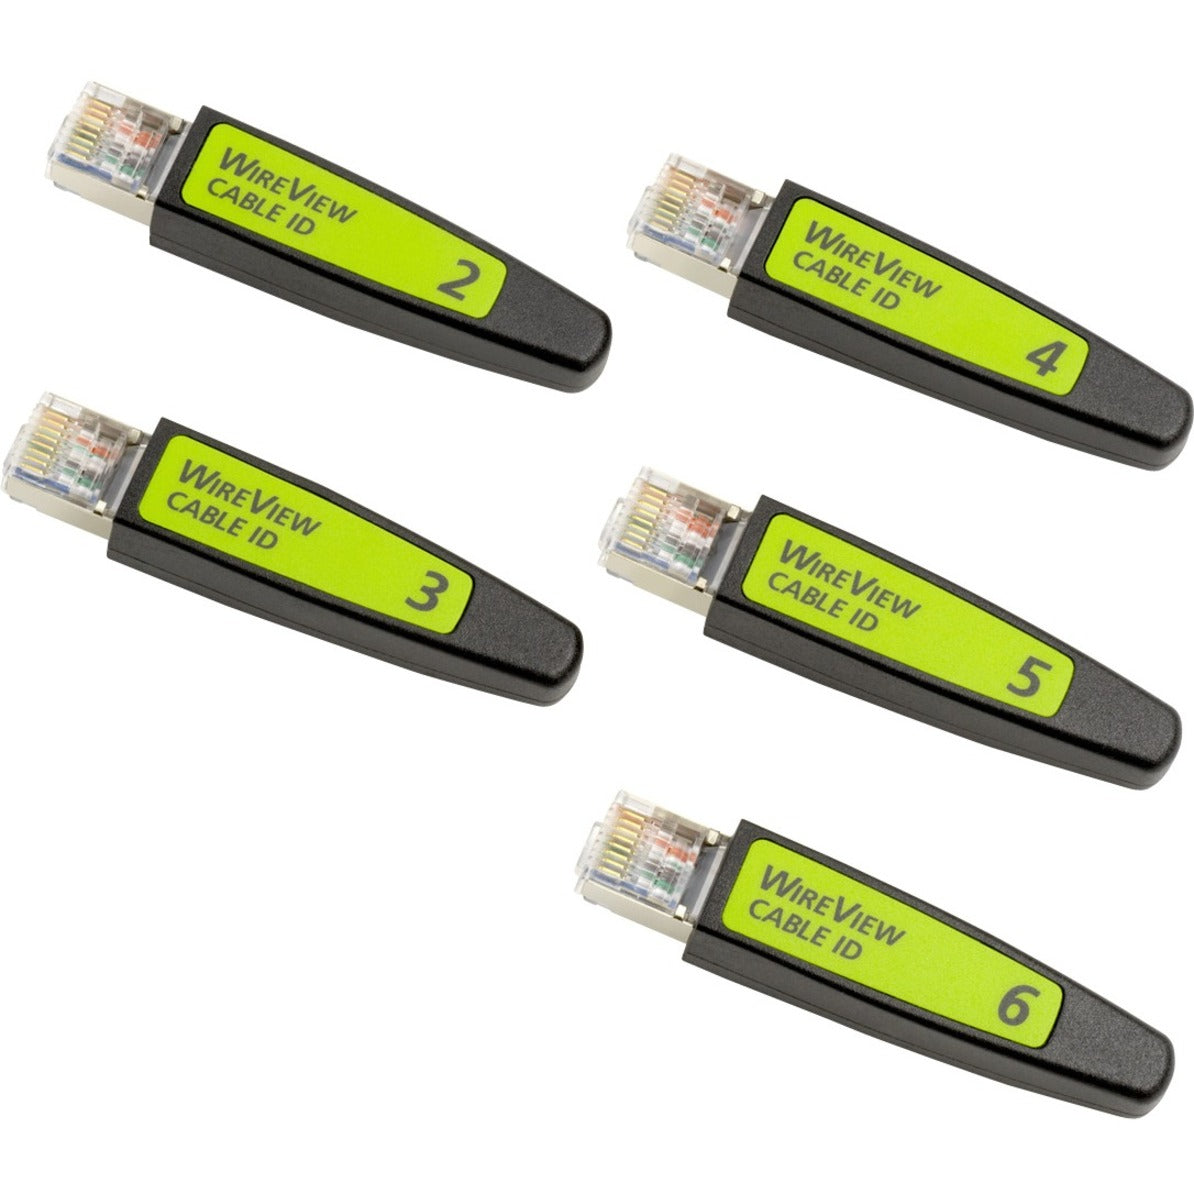 NetAlly WIREVIEW 2-6 WireView Cable IDs #2-6, Network Testing, Wiremap